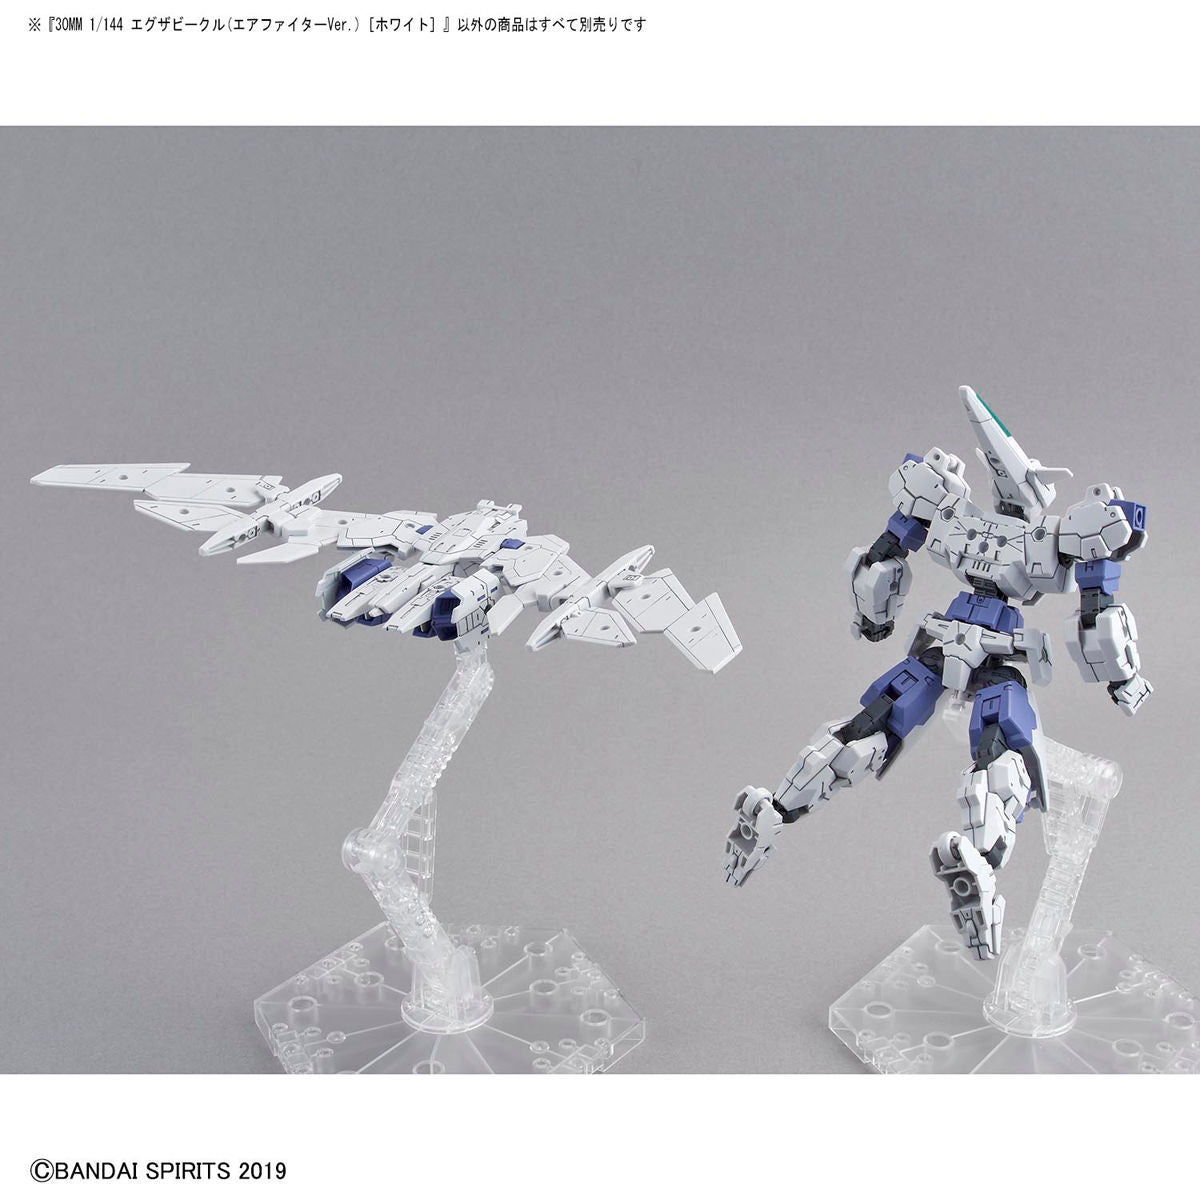 30MM Extended Armament Vechicle - [Air Fighter Ver.][White]